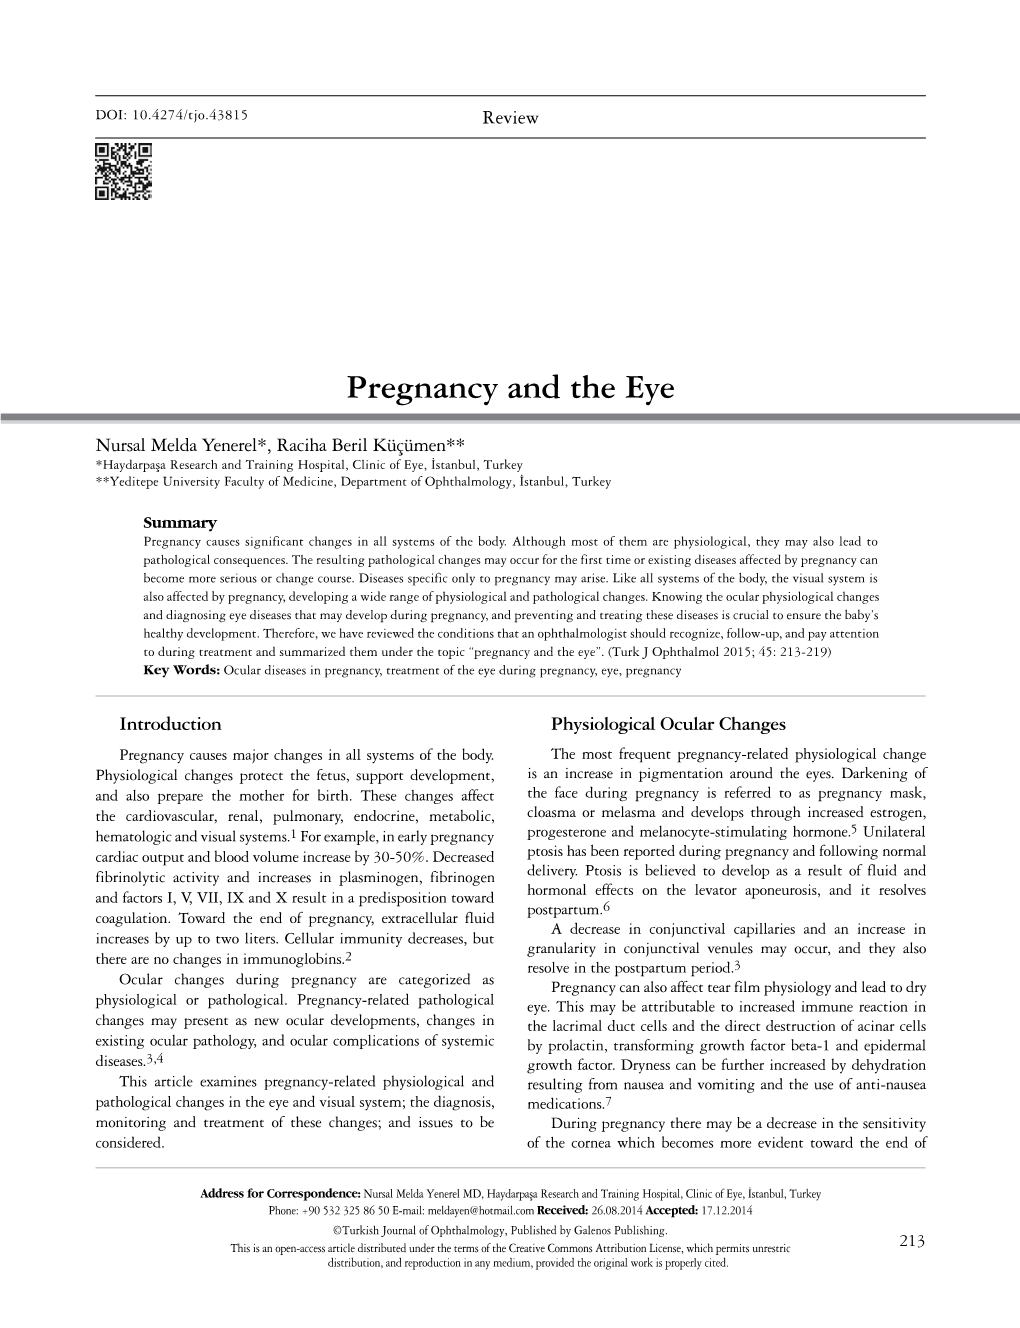 Pregnancy and the Eye